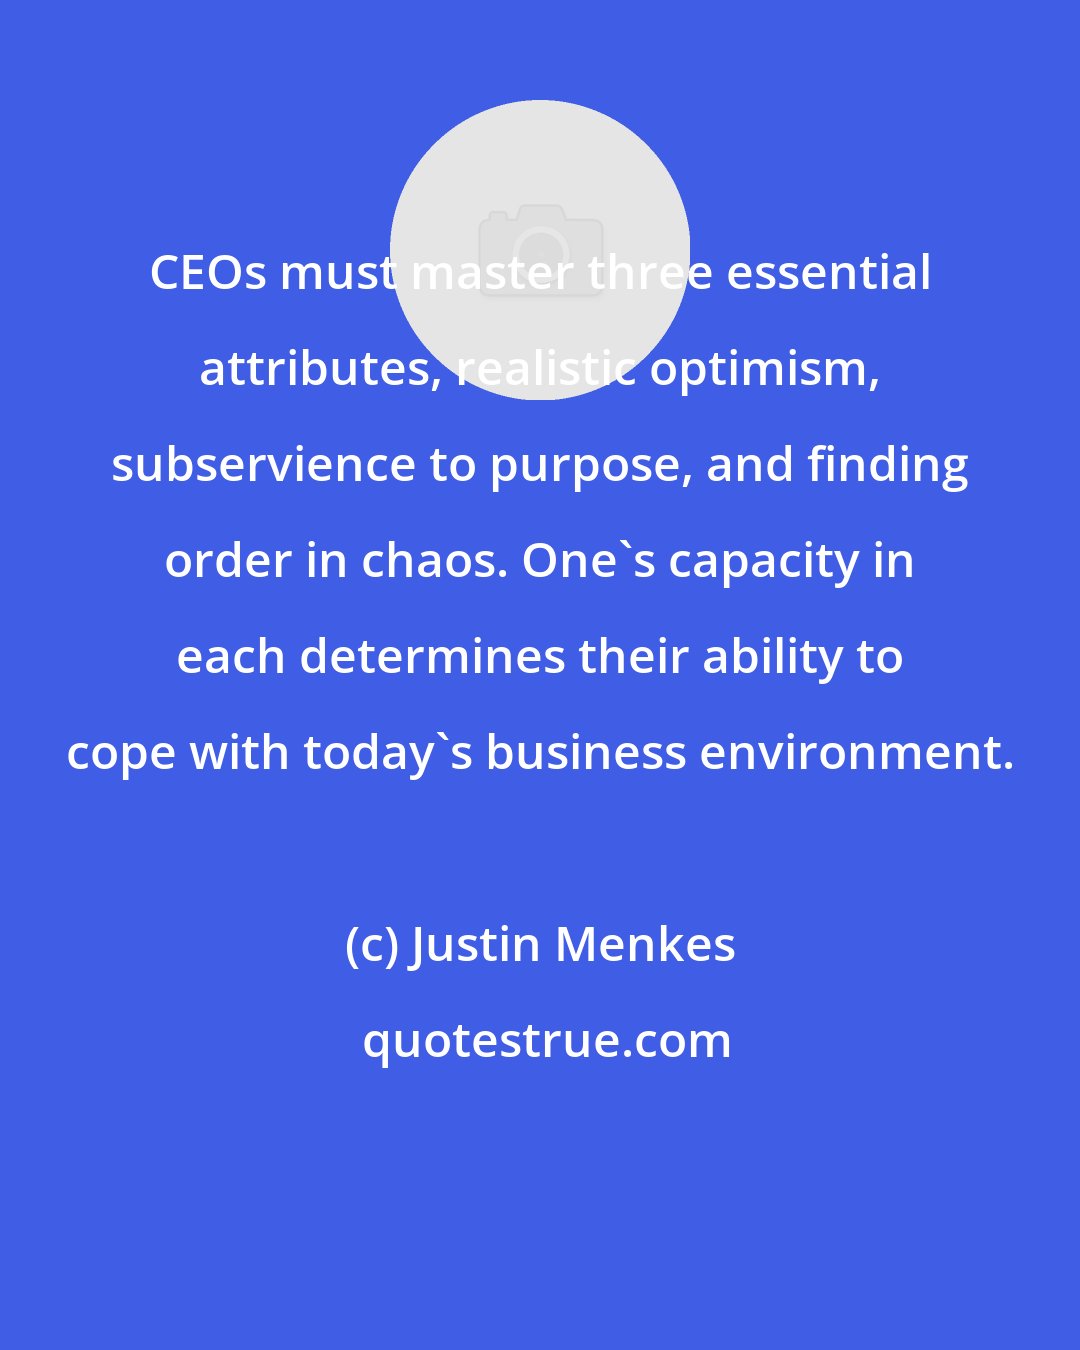 Justin Menkes: CEOs must master three essential attributes, realistic optimism, subservience to purpose, and finding order in chaos. One's capacity in each determines their ability to cope with today's business environment.